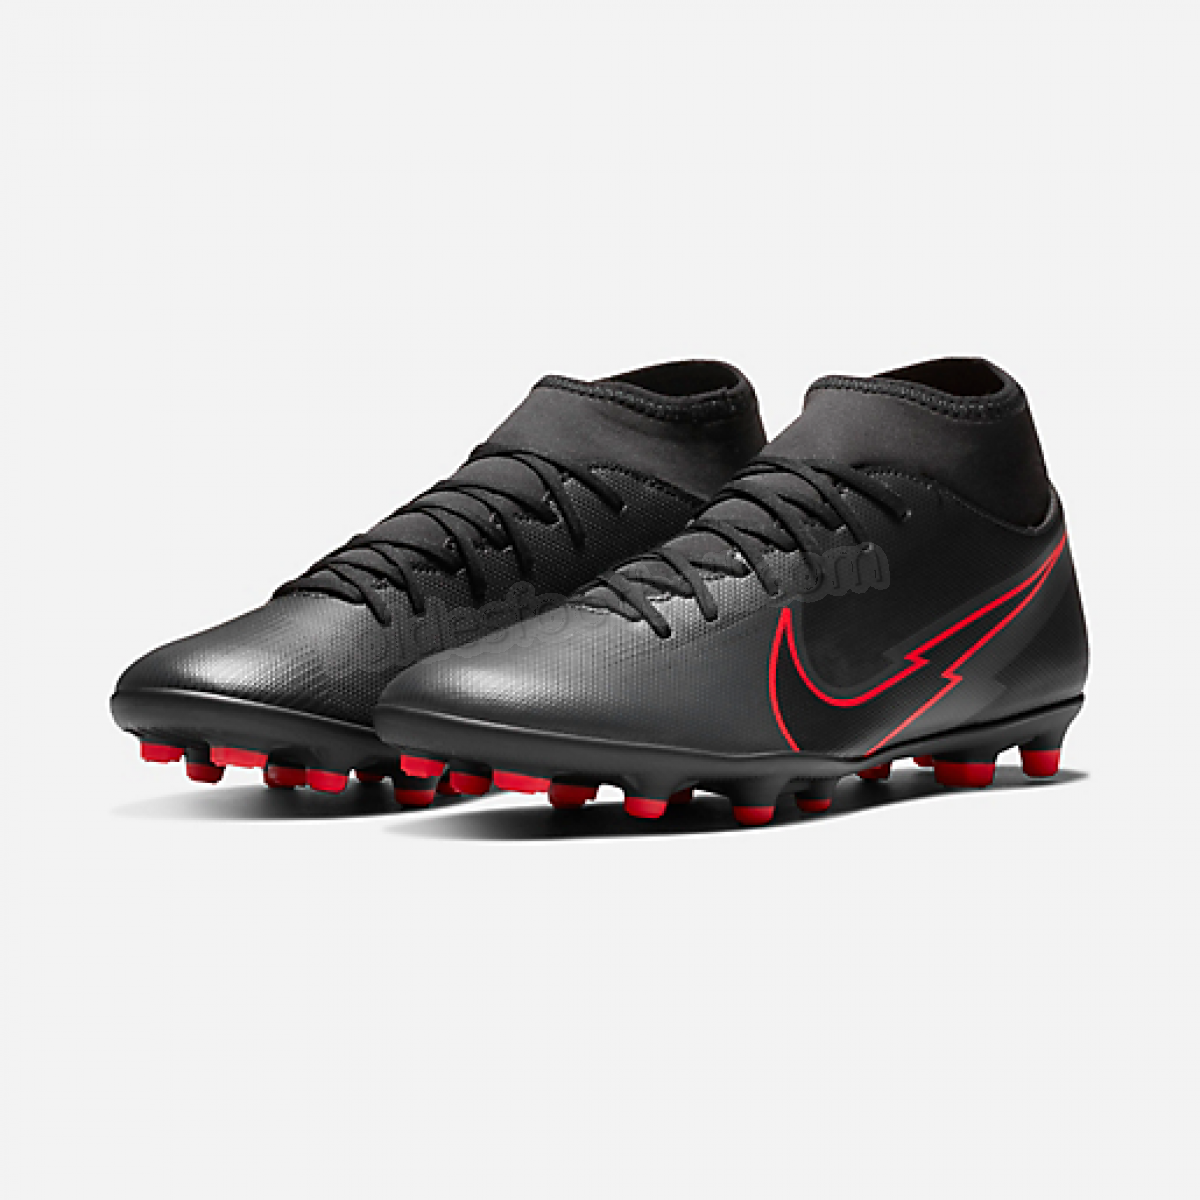 Chaussures de football moulées homme SUPERFLY 7 CLUB FG/MG-NIKE en solde - Chaussures de football moulées homme SUPERFLY 7 CLUB FG/MG-NIKE en solde